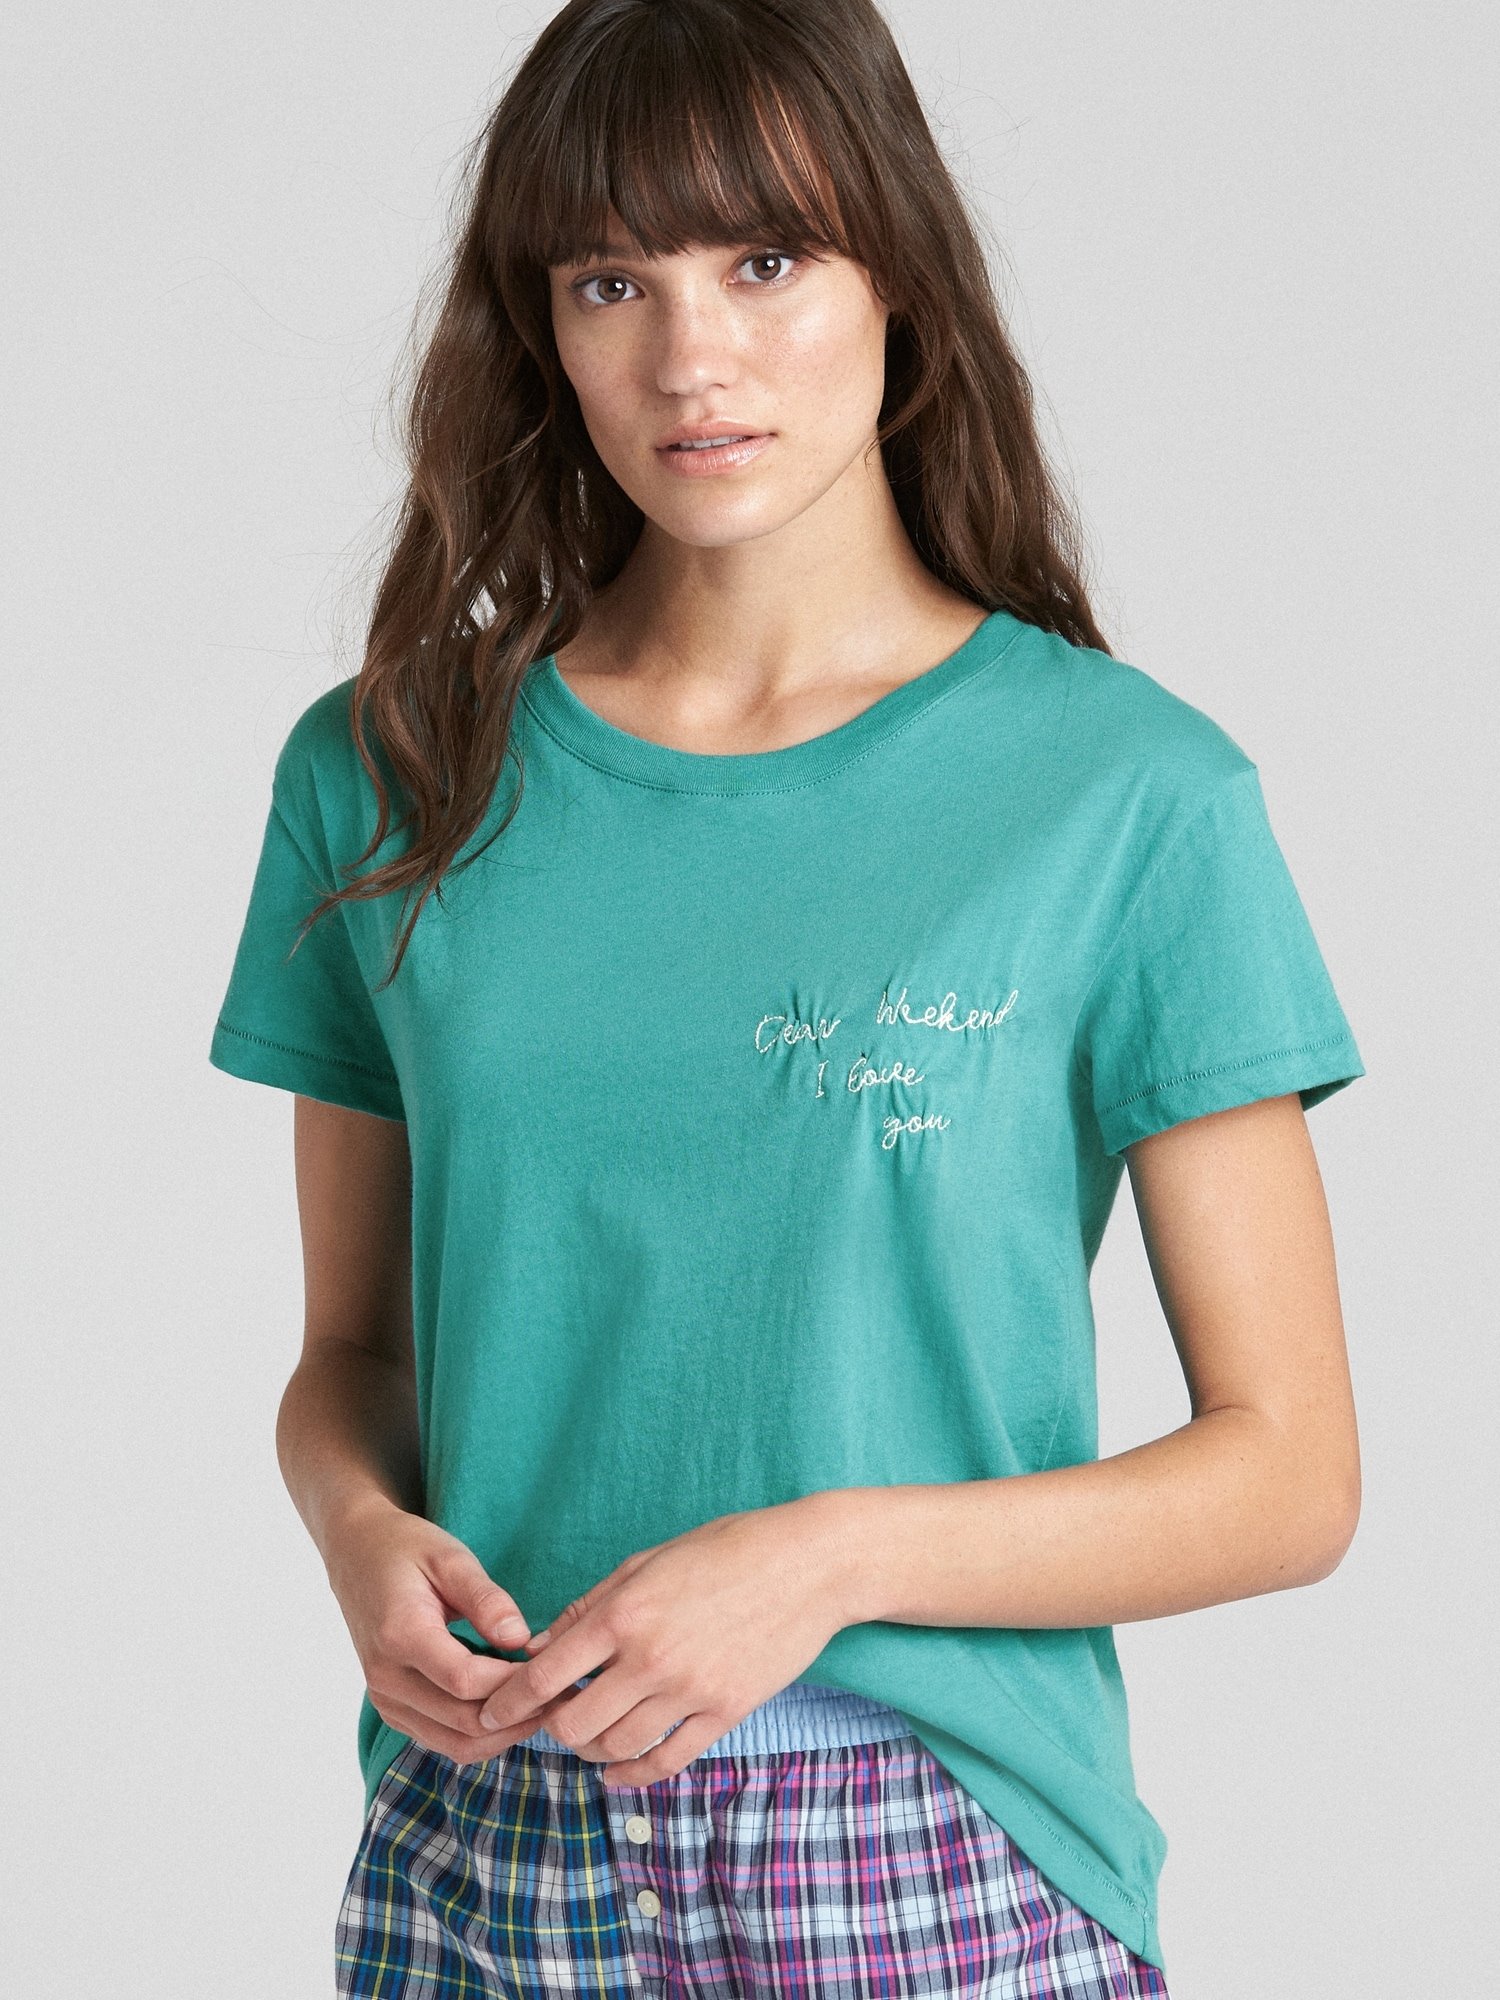 Forever Favorite T-Shirt product image